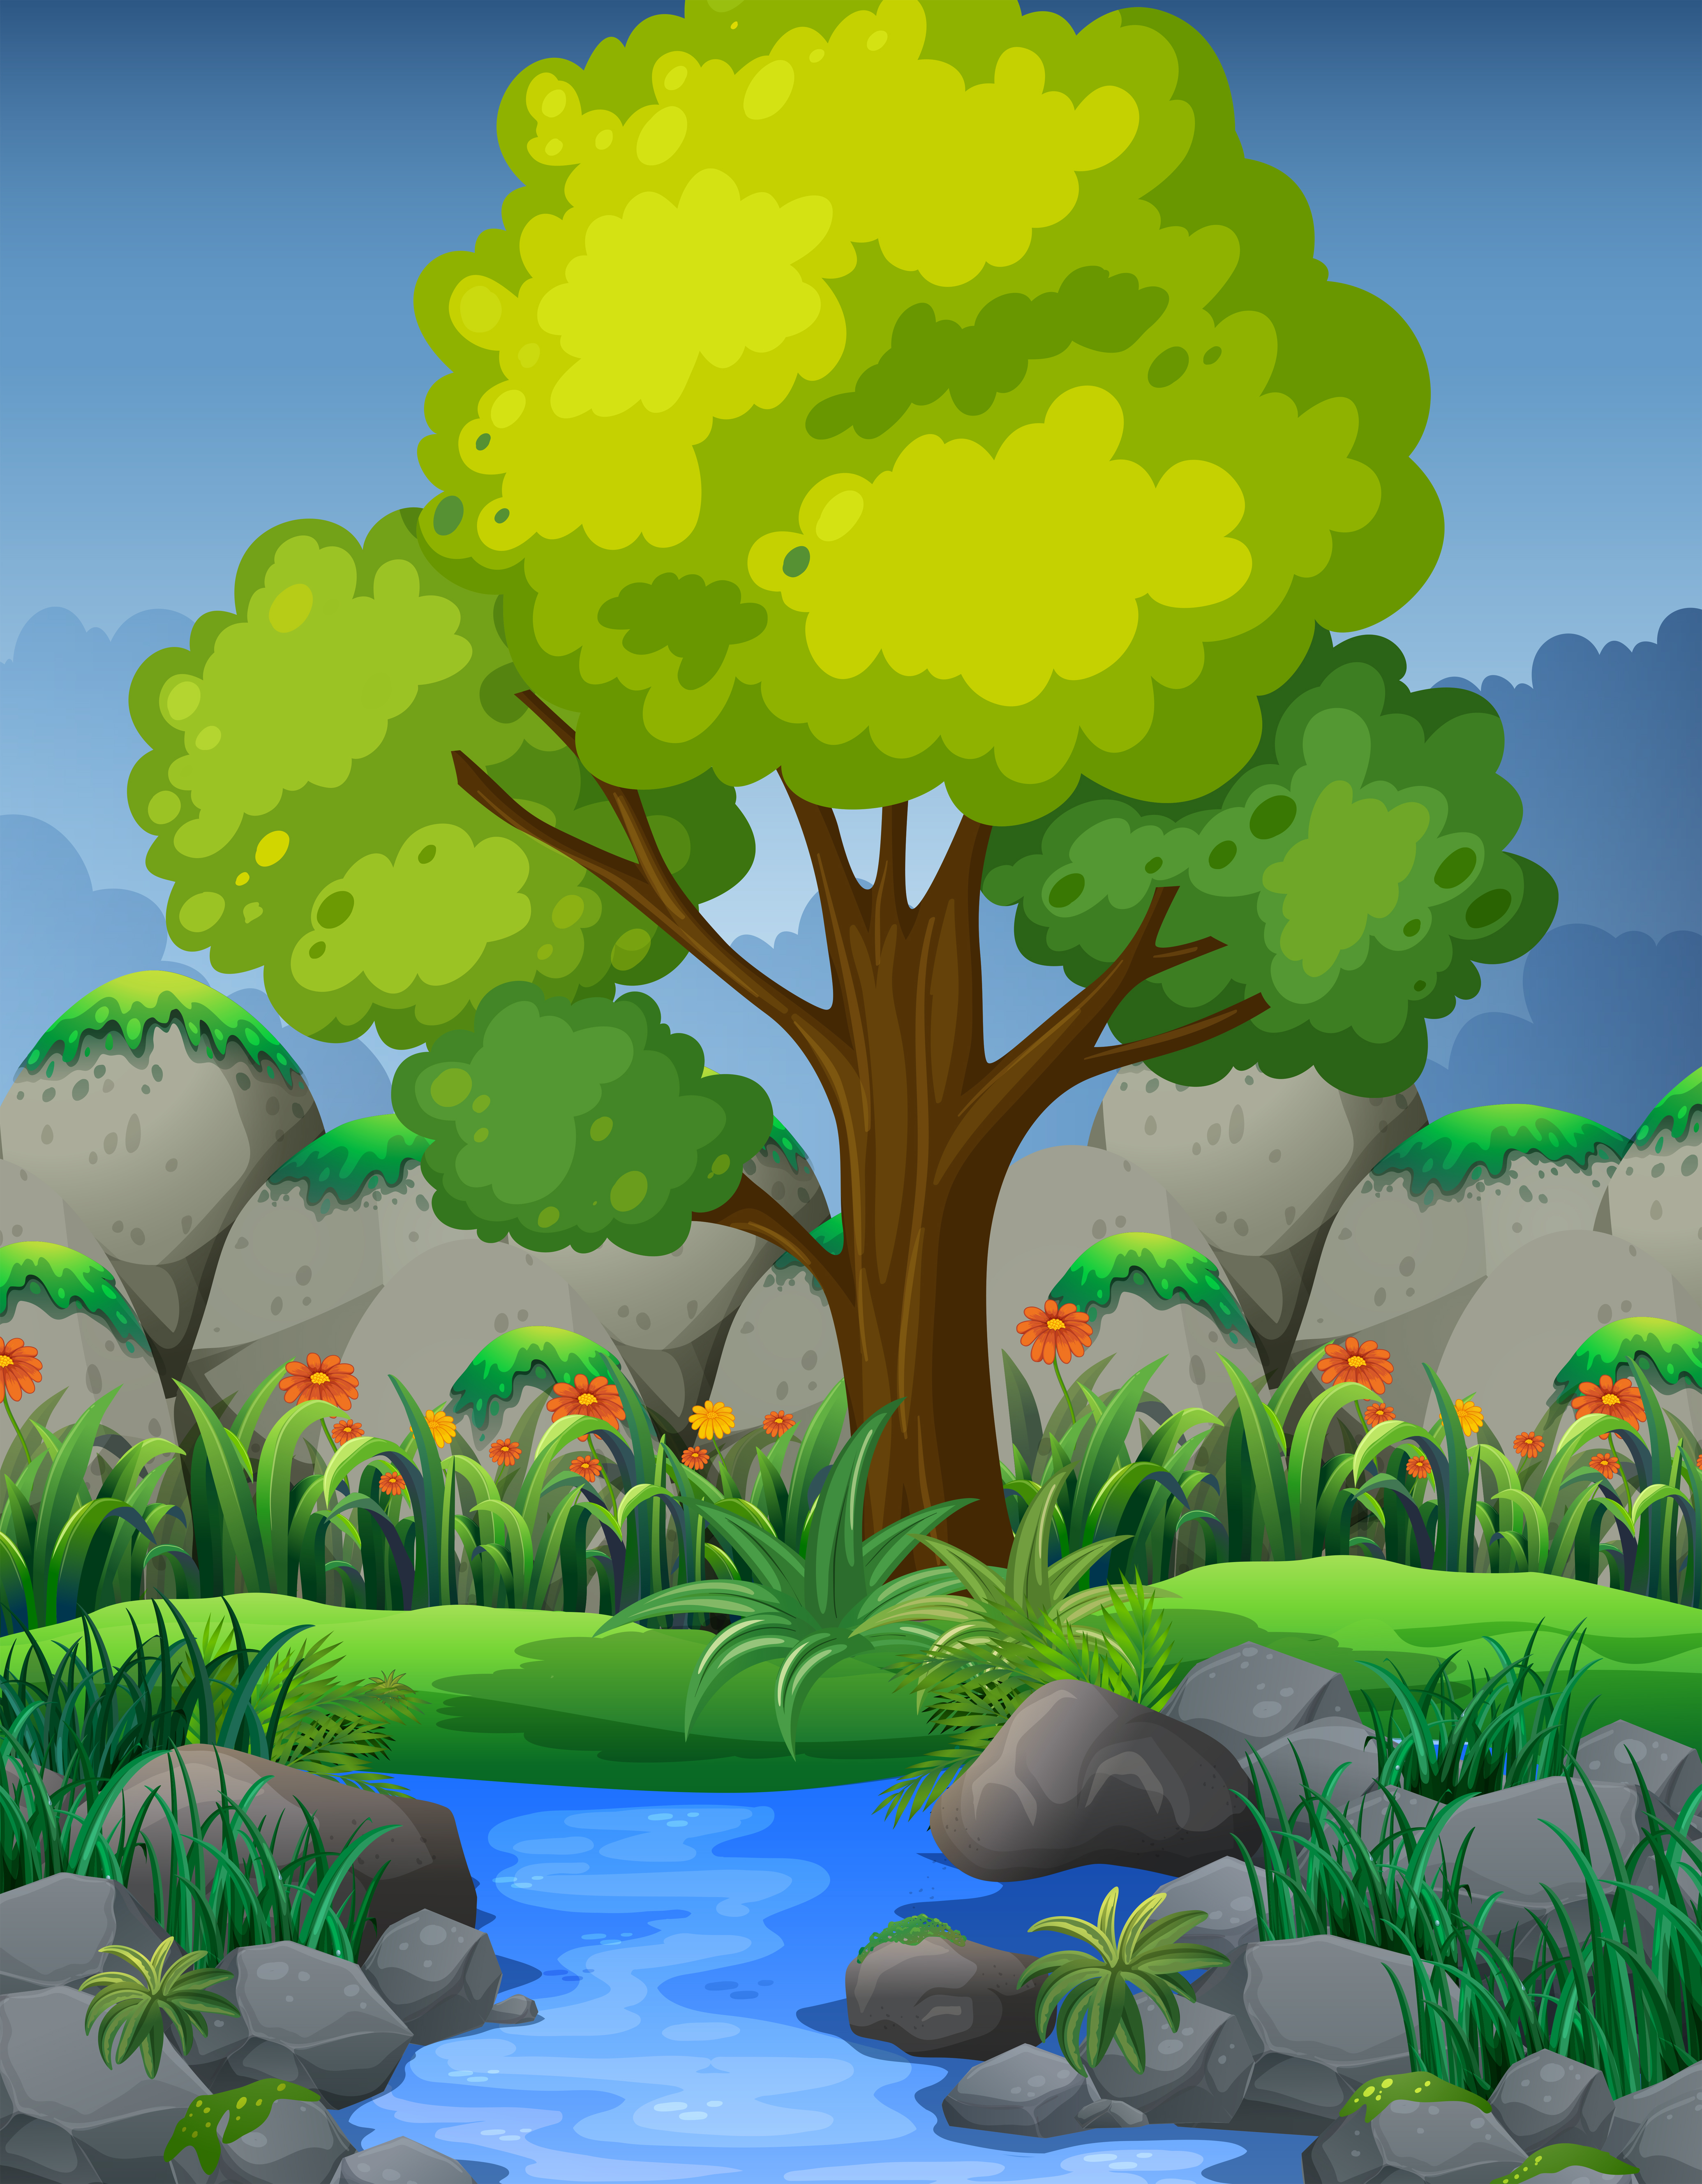  Nature  scene with river in forest Download Free Vectors 